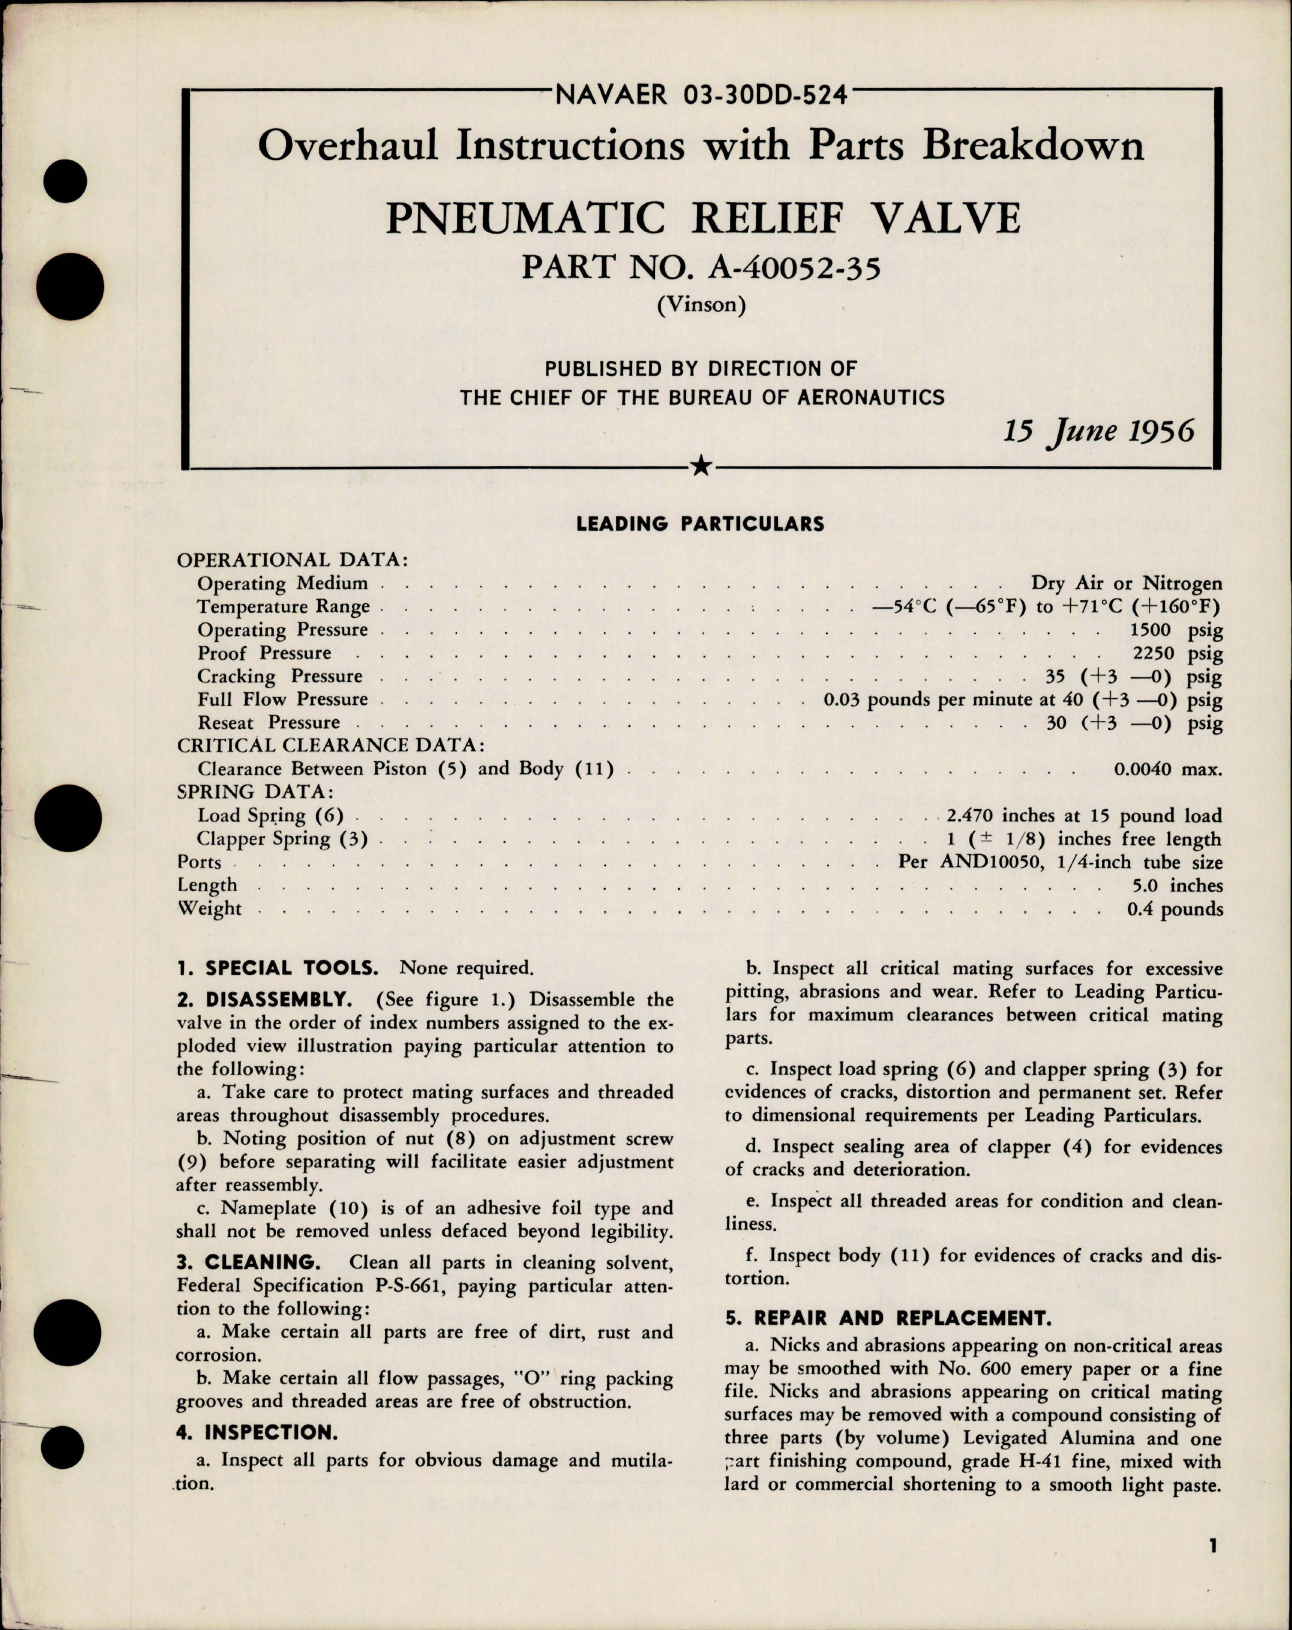 Sample page 1 from AirCorps Library document: Overhaul Instructions with Parts Breakdown for Pneumatic Relief Valve - Part A-40052-35